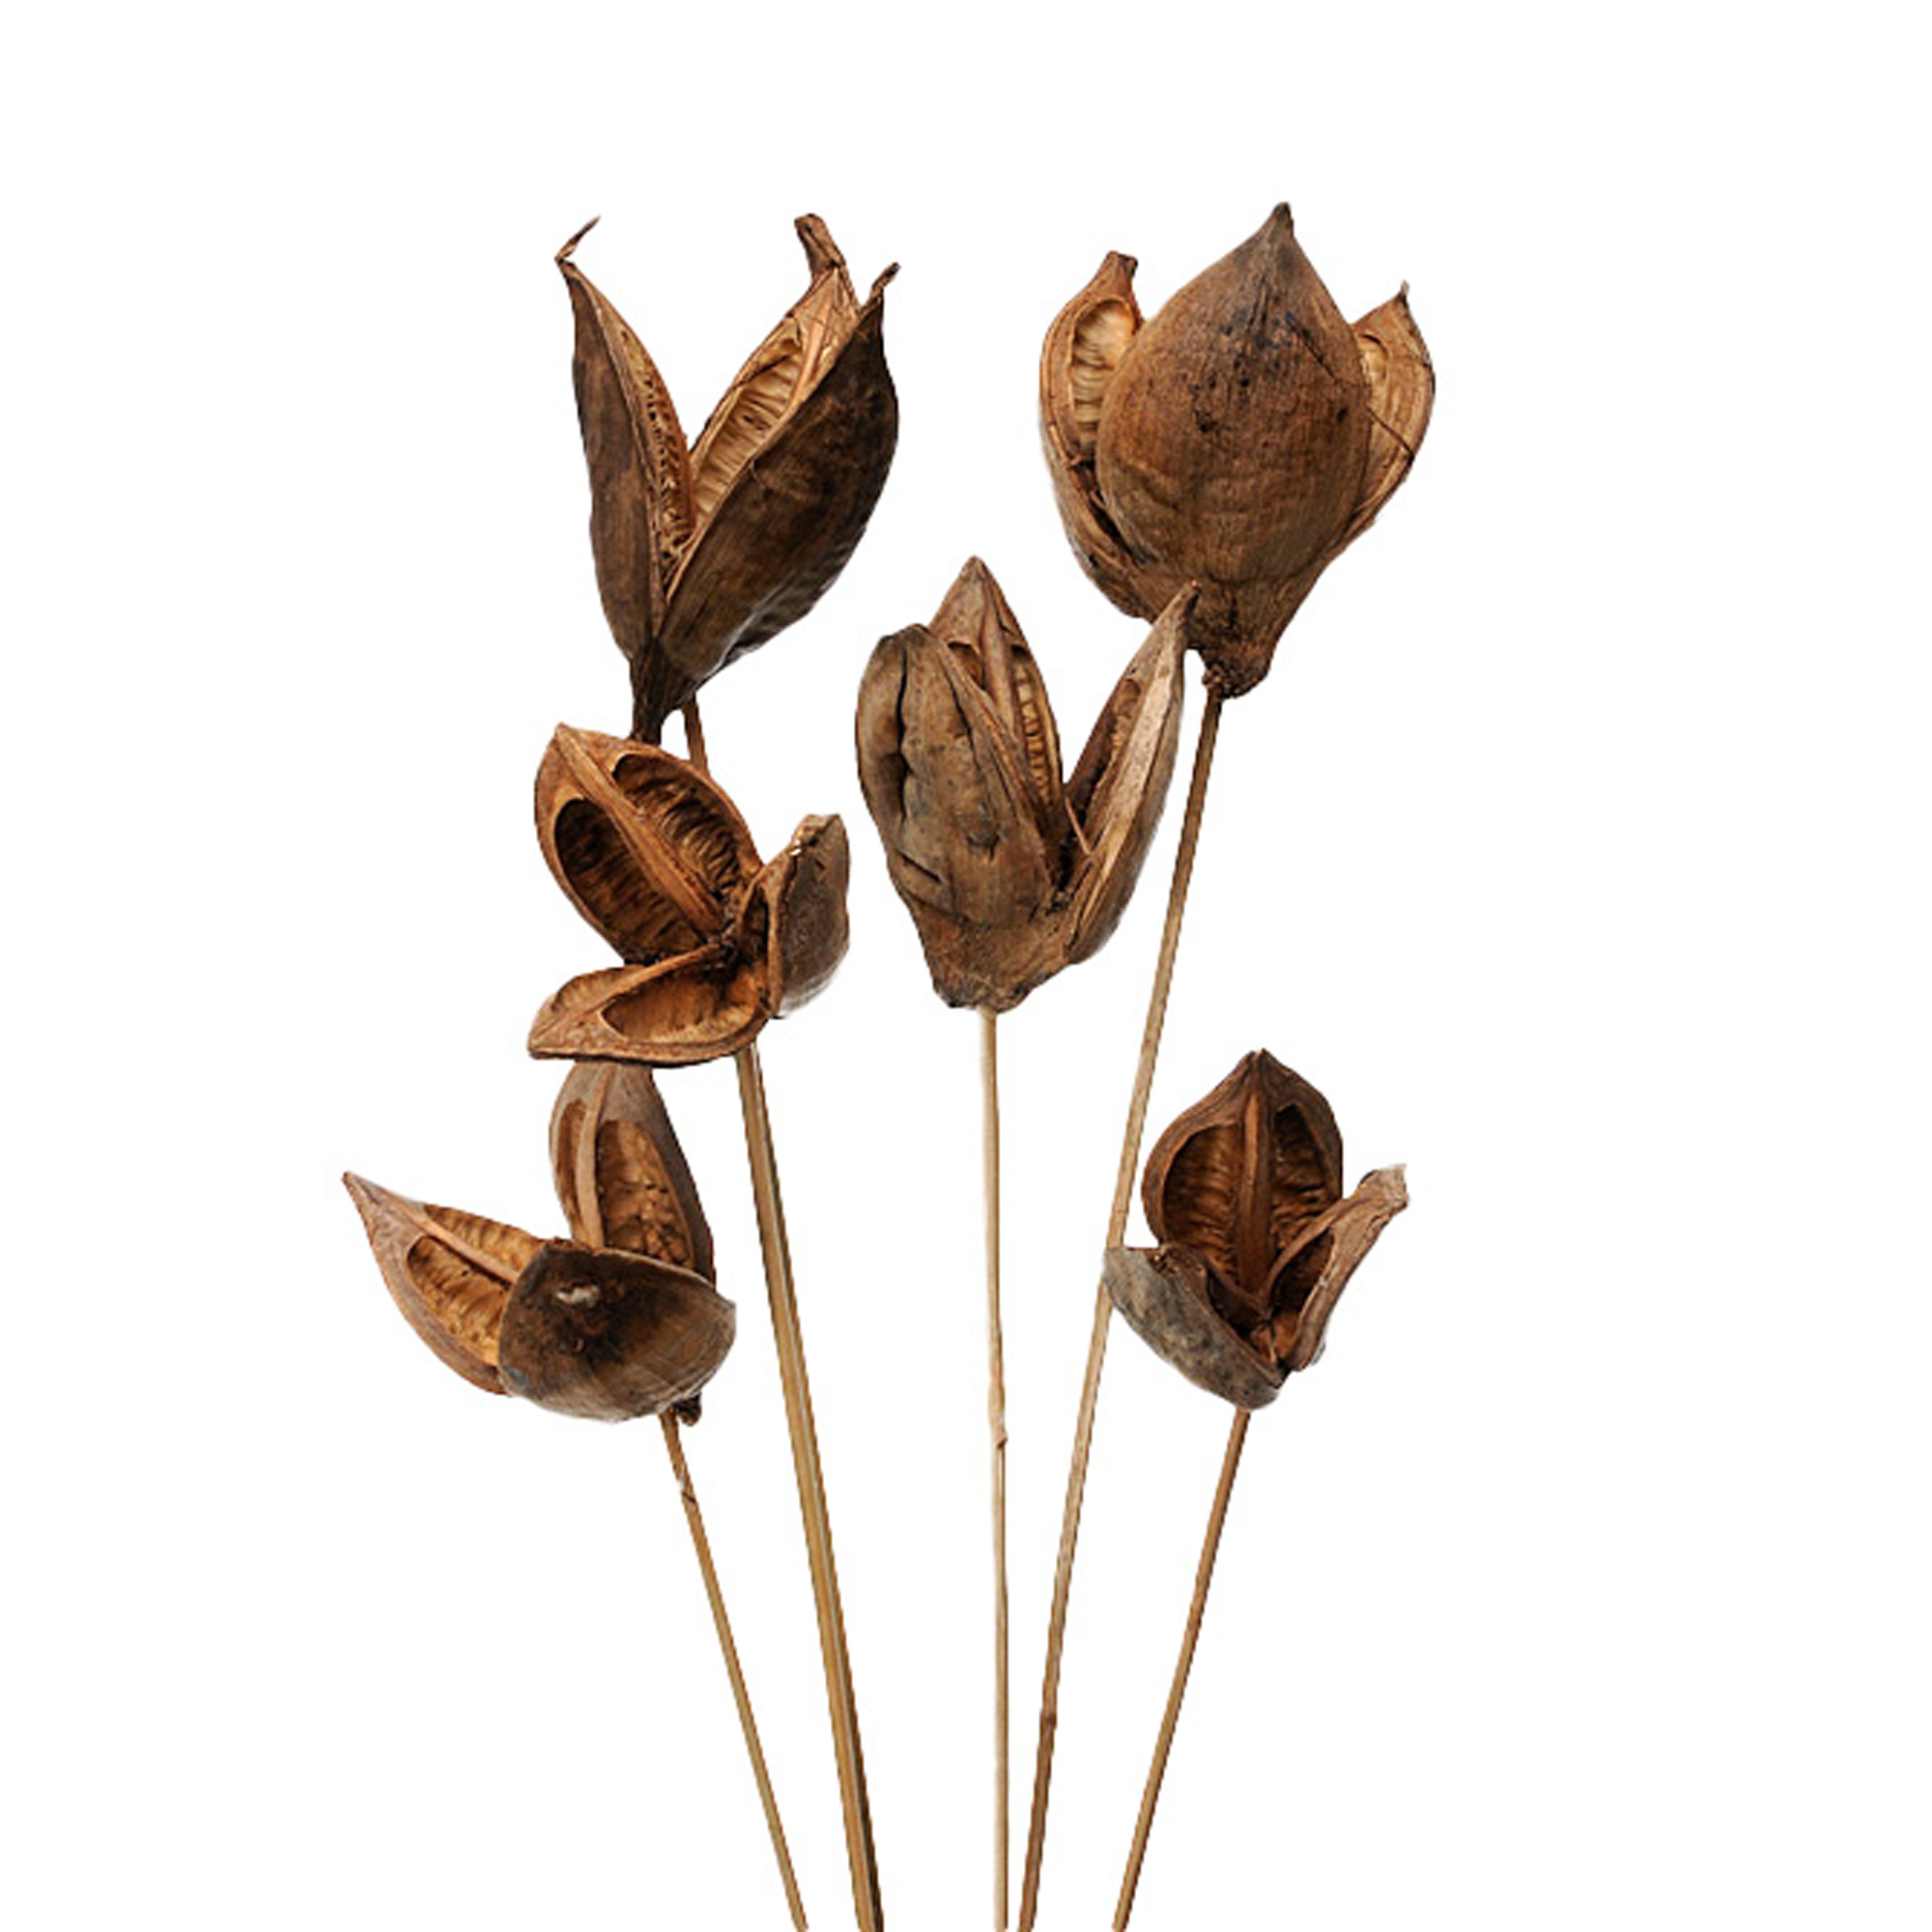 NATURAL PRODUCTS DRIED FLOWERS AND ERBS, Cones and fruits with stem, SOROROCA FRUTTO 3 PZ 75 CM GAMBATO